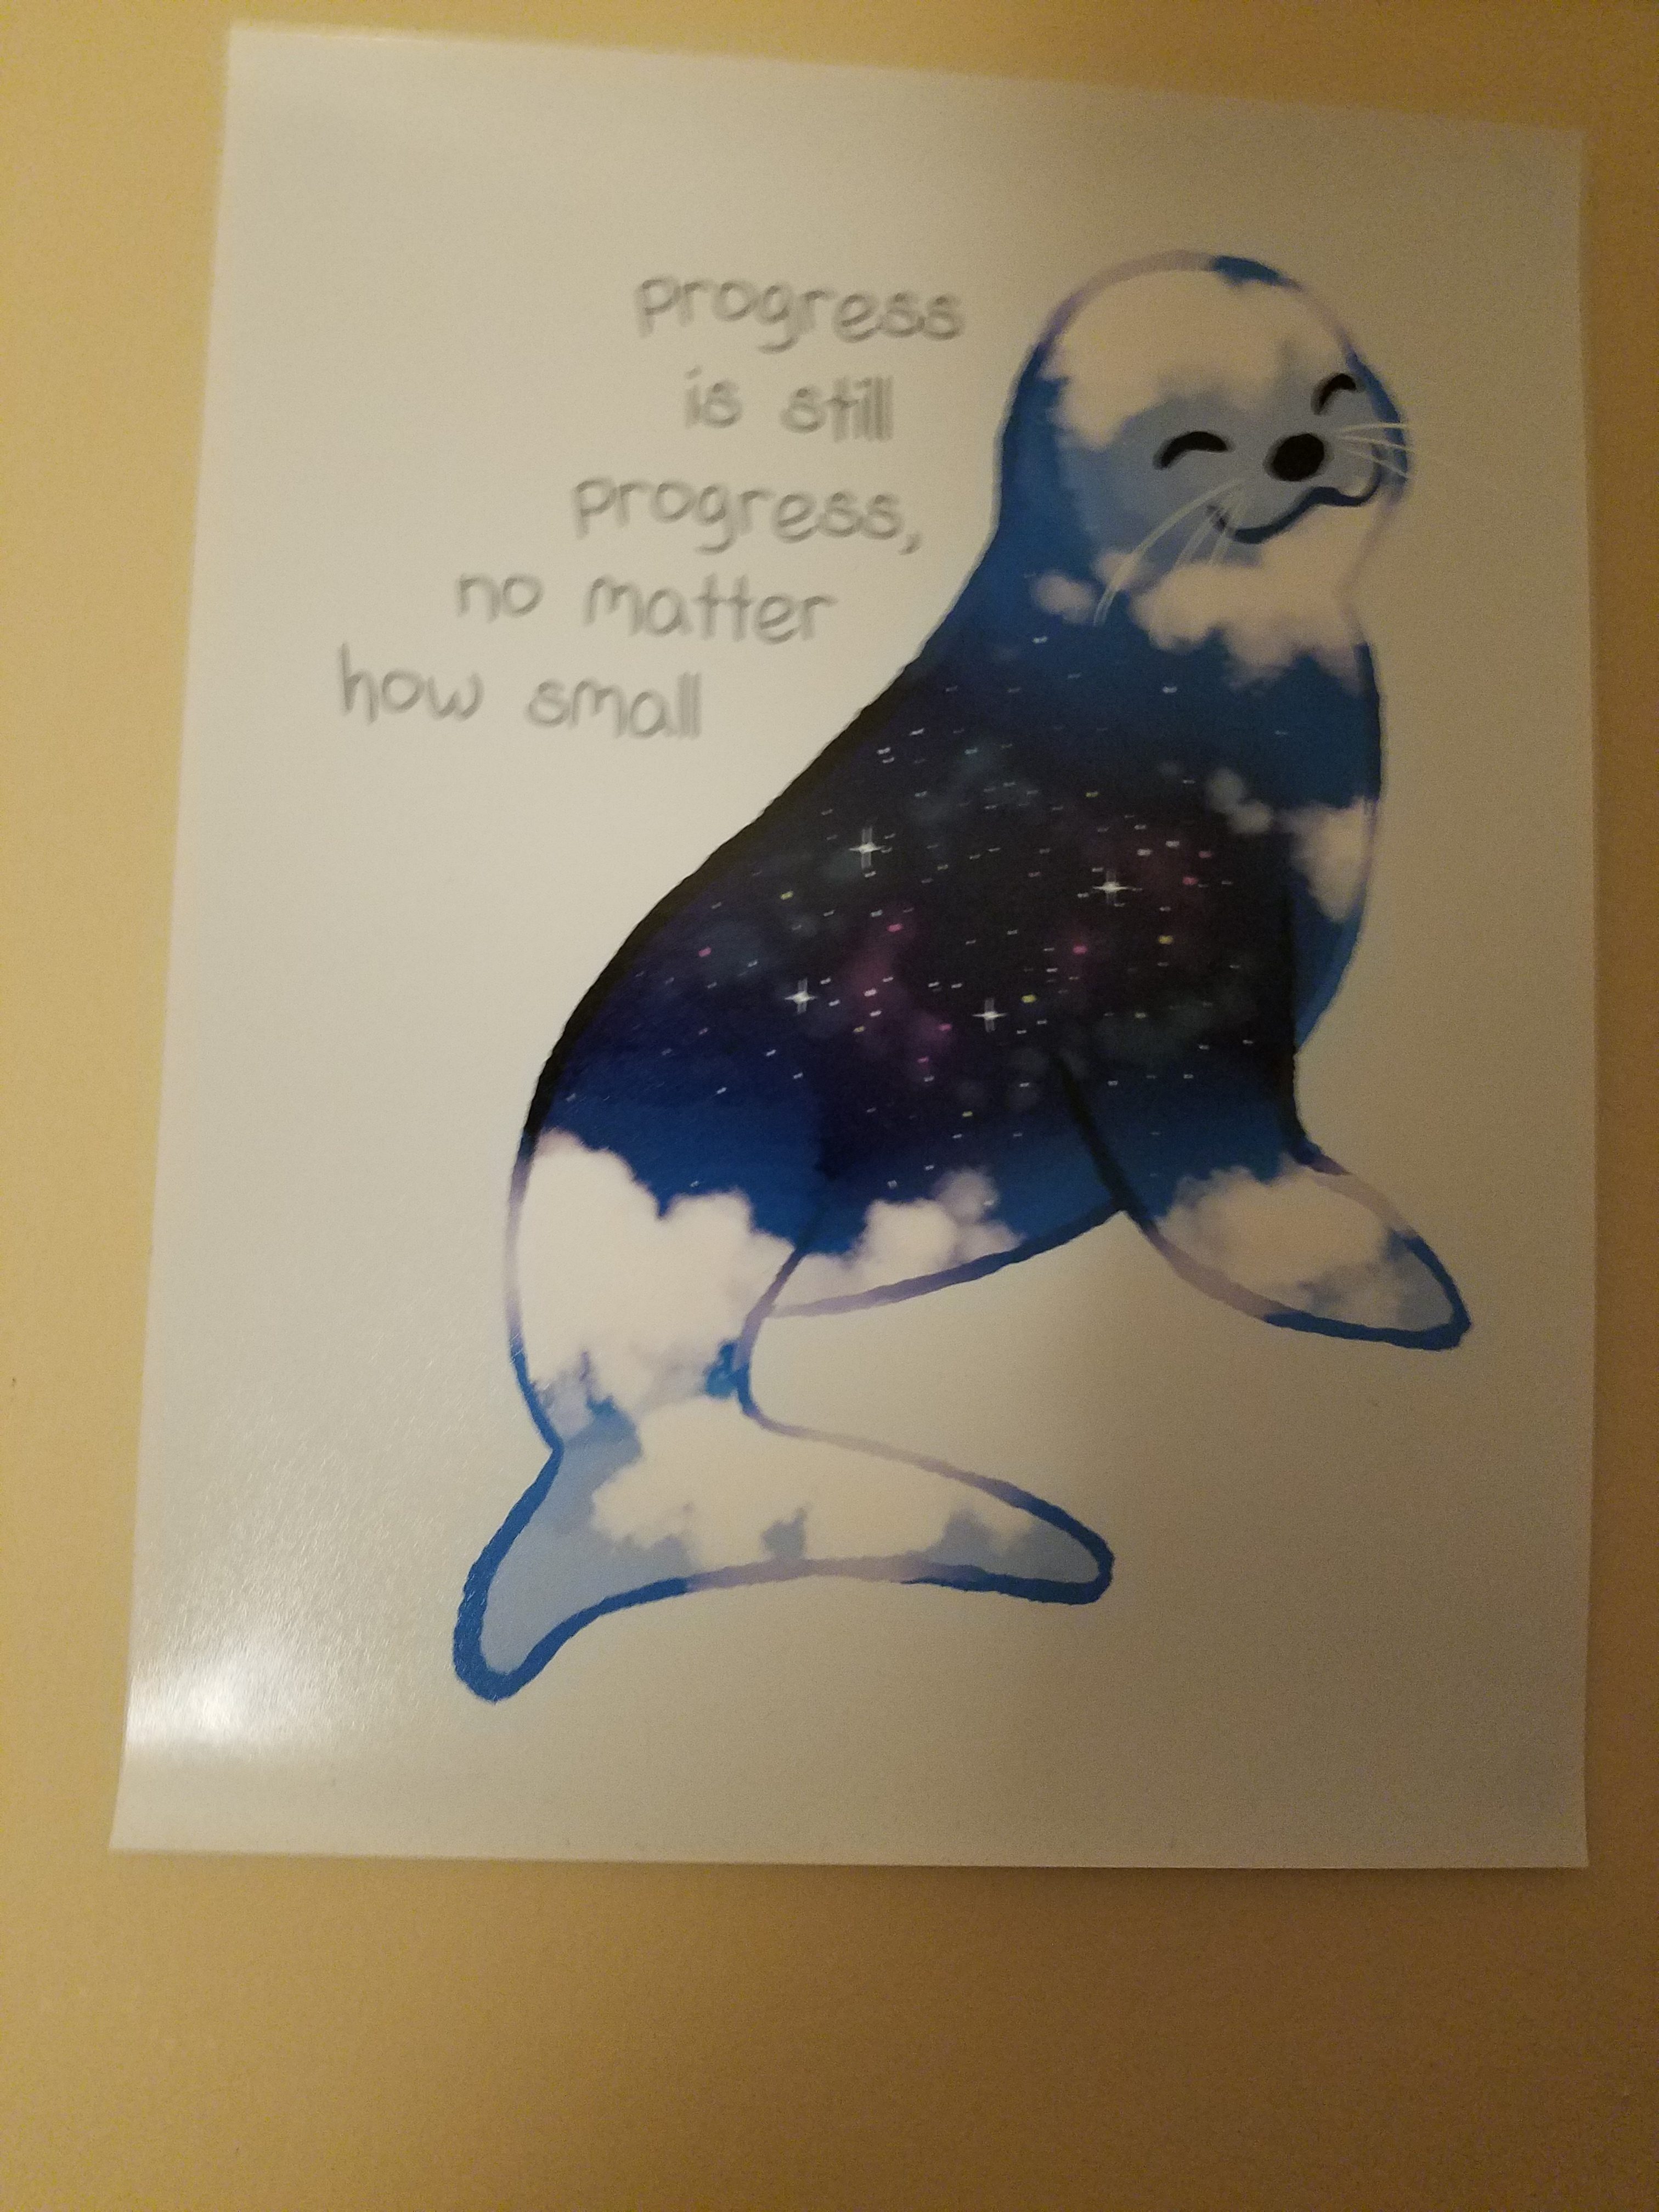 picture of a seal with progress quote